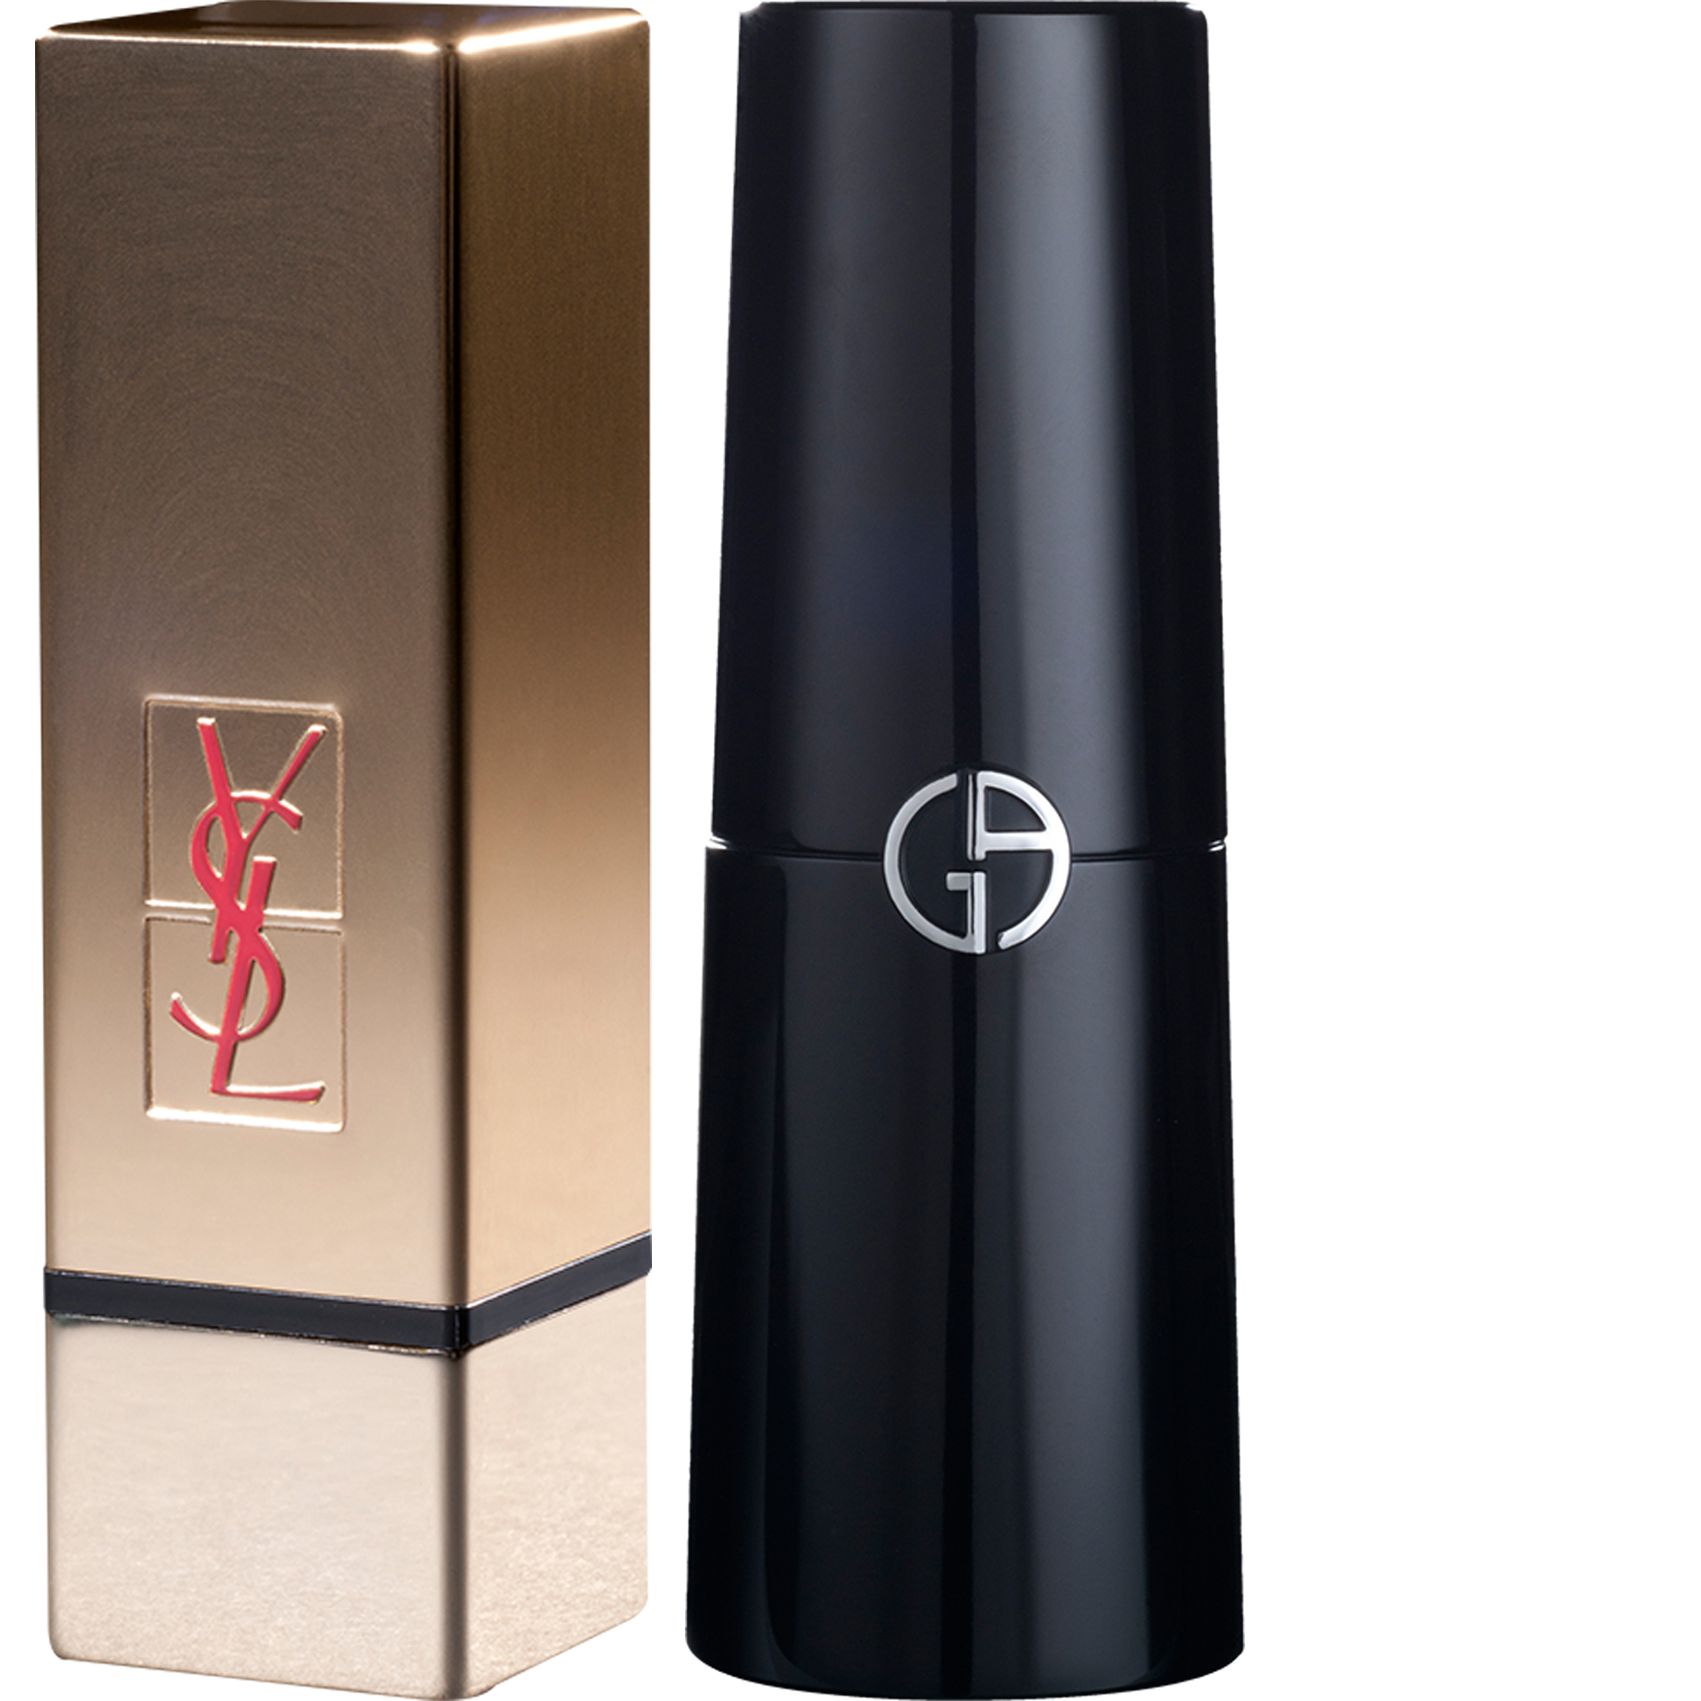 Yves Saint Laurent Pure Couture is a gold lipstick based on the YSL design and developed by Axilone. The perfectly angled cubic design is made of aluminum and the lid is deeply etched. The decoration is anodized gold. The logo is partially engraved and covered with red silkscreen. For the new take on Armani's sculptural and magnetic lipstick